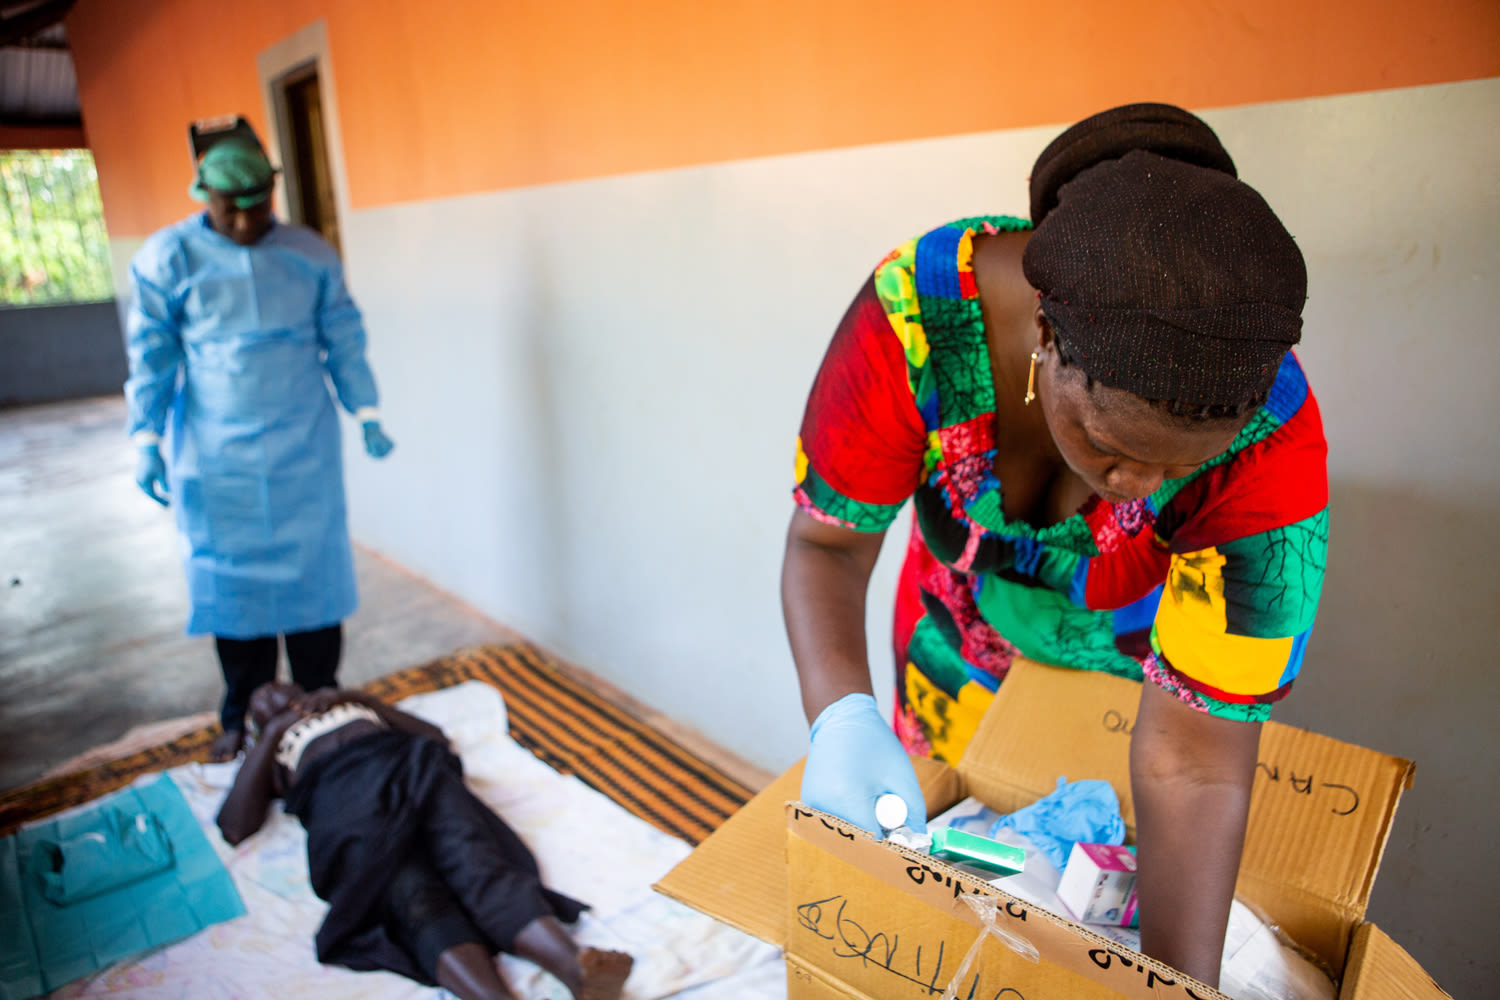 Dionesa, nurse assistant, grabs surgical materials while Forma preps Nene for trachoma surgery on the porch of her home